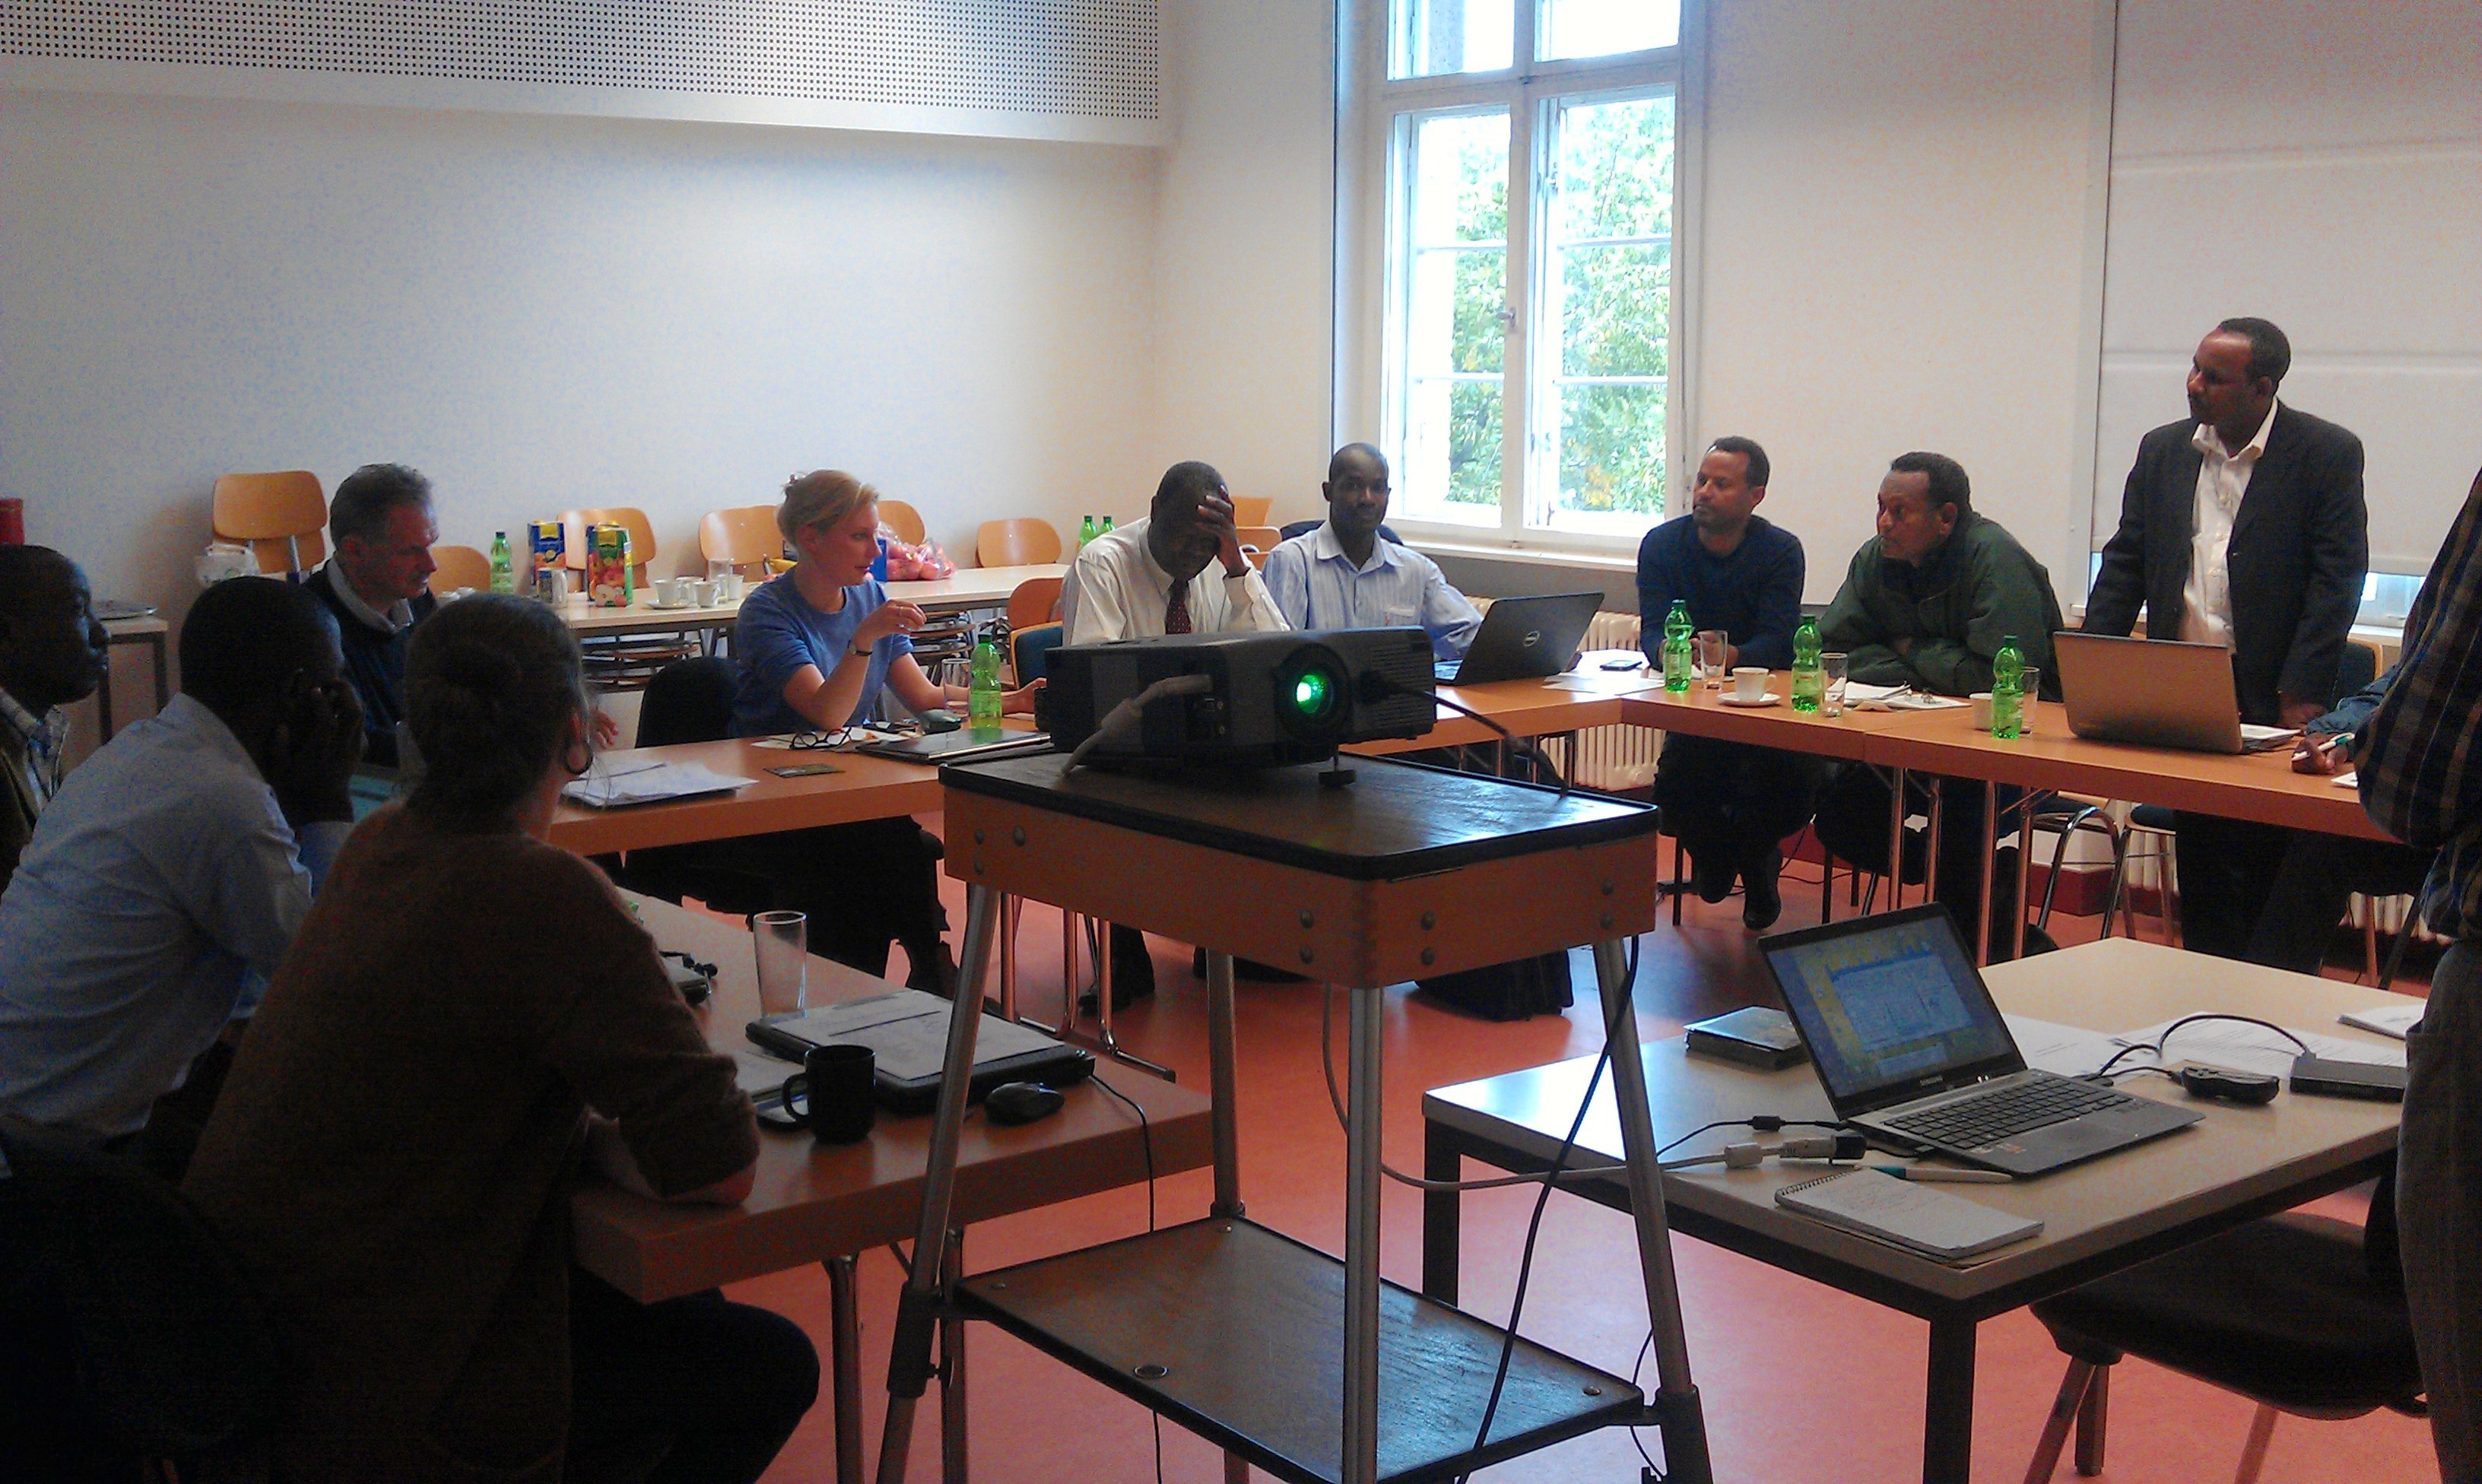 Group discussion during the Annual Workshop in Berlin